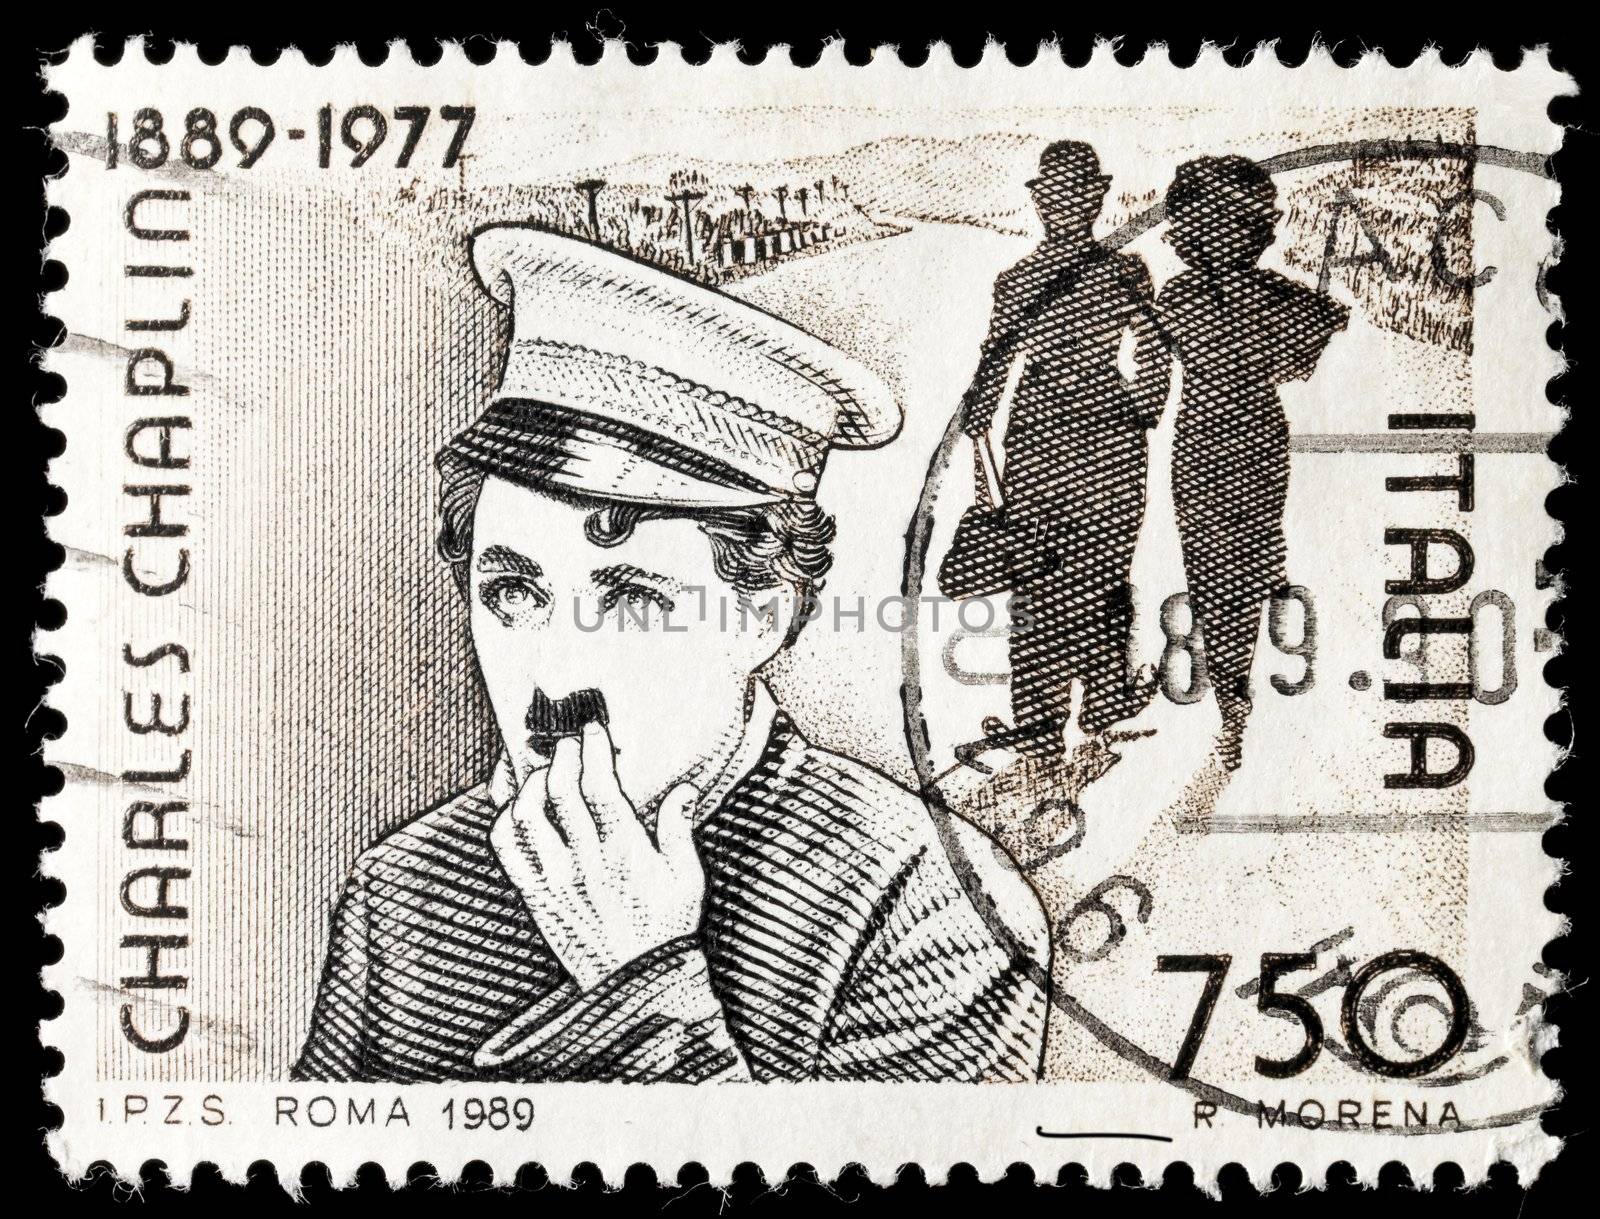 ITALY - CIRCA 1989: Commemorative stamp celebrating 100 years from the birth of Chares Chaplin circa 1989 in Italy